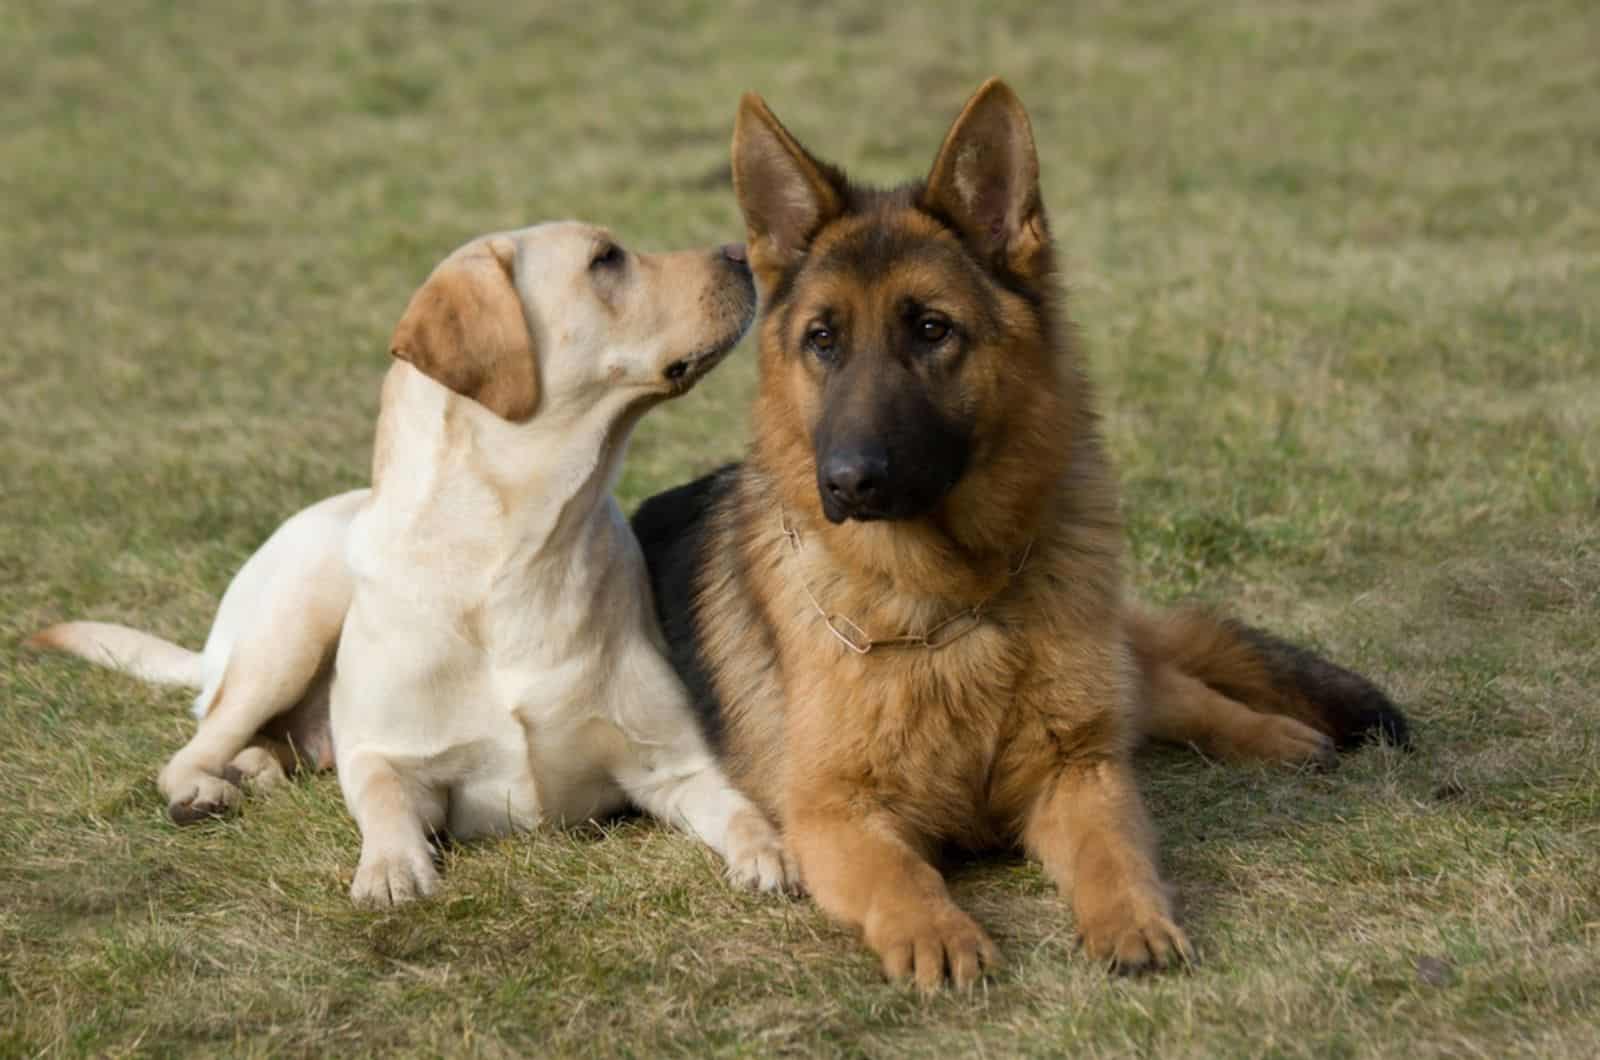 Do German Shepherds Get Along With Other Dogs Or Not?